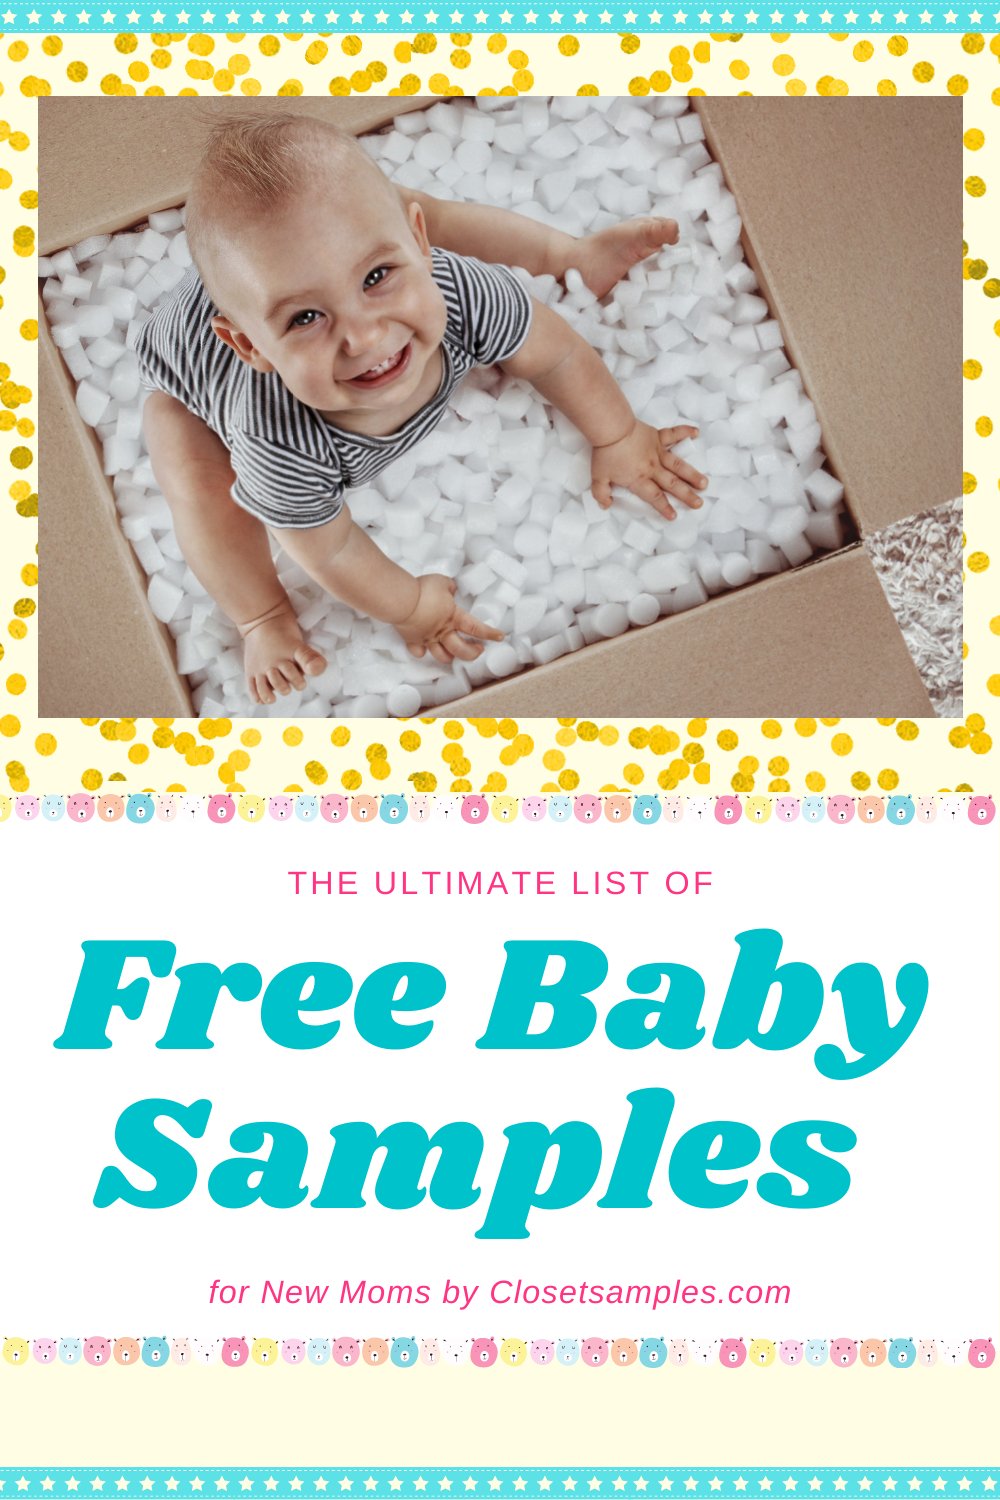 The Ultimate List of Free Baby Samples for New Moms Pinterest